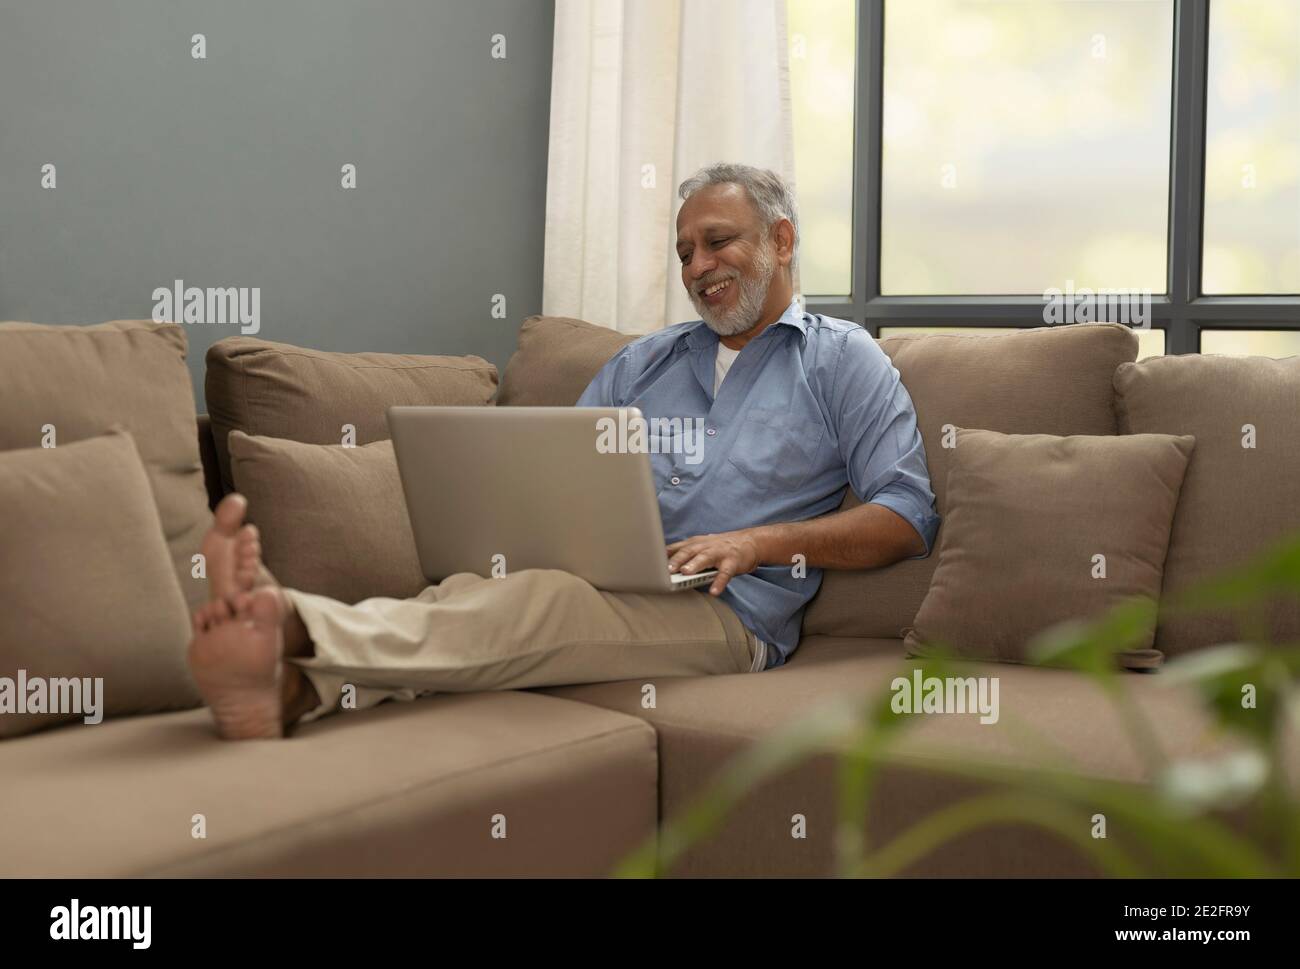 A SENIOR ADULT MAN HAPPILY SITTING AND USING LAPTOP Stock Photo